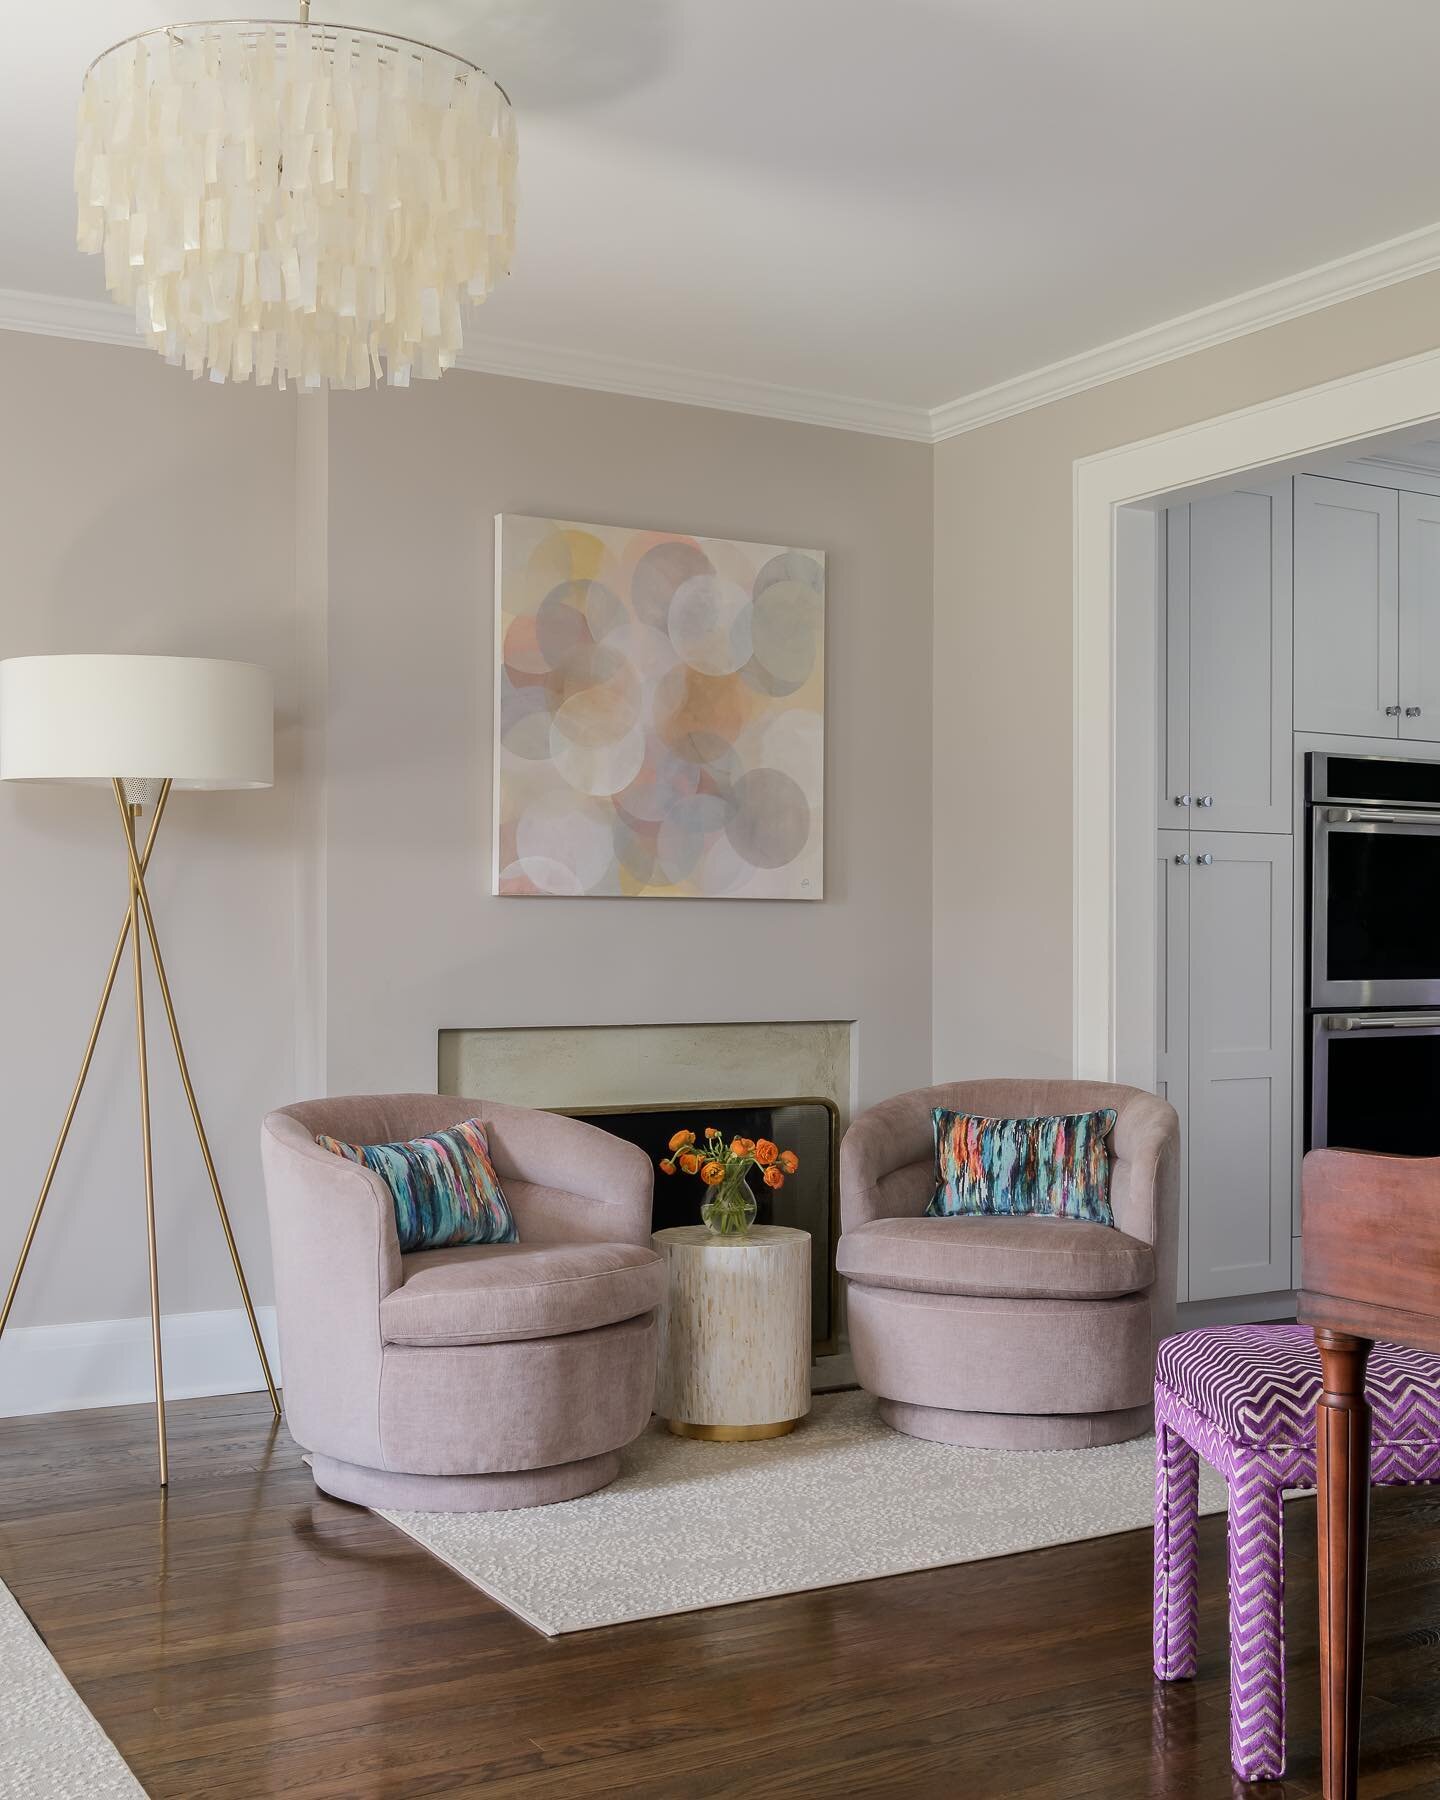 A pretty sitting room situation to start the week.

Design: @serenityhomestyling 
📸: @meghanbalcomphotography 

#interiordesign #njinteriordesign #njinterior #njinteriors #njphotographer #njinteriorphotographer #interiorphotography #interiorphotogra